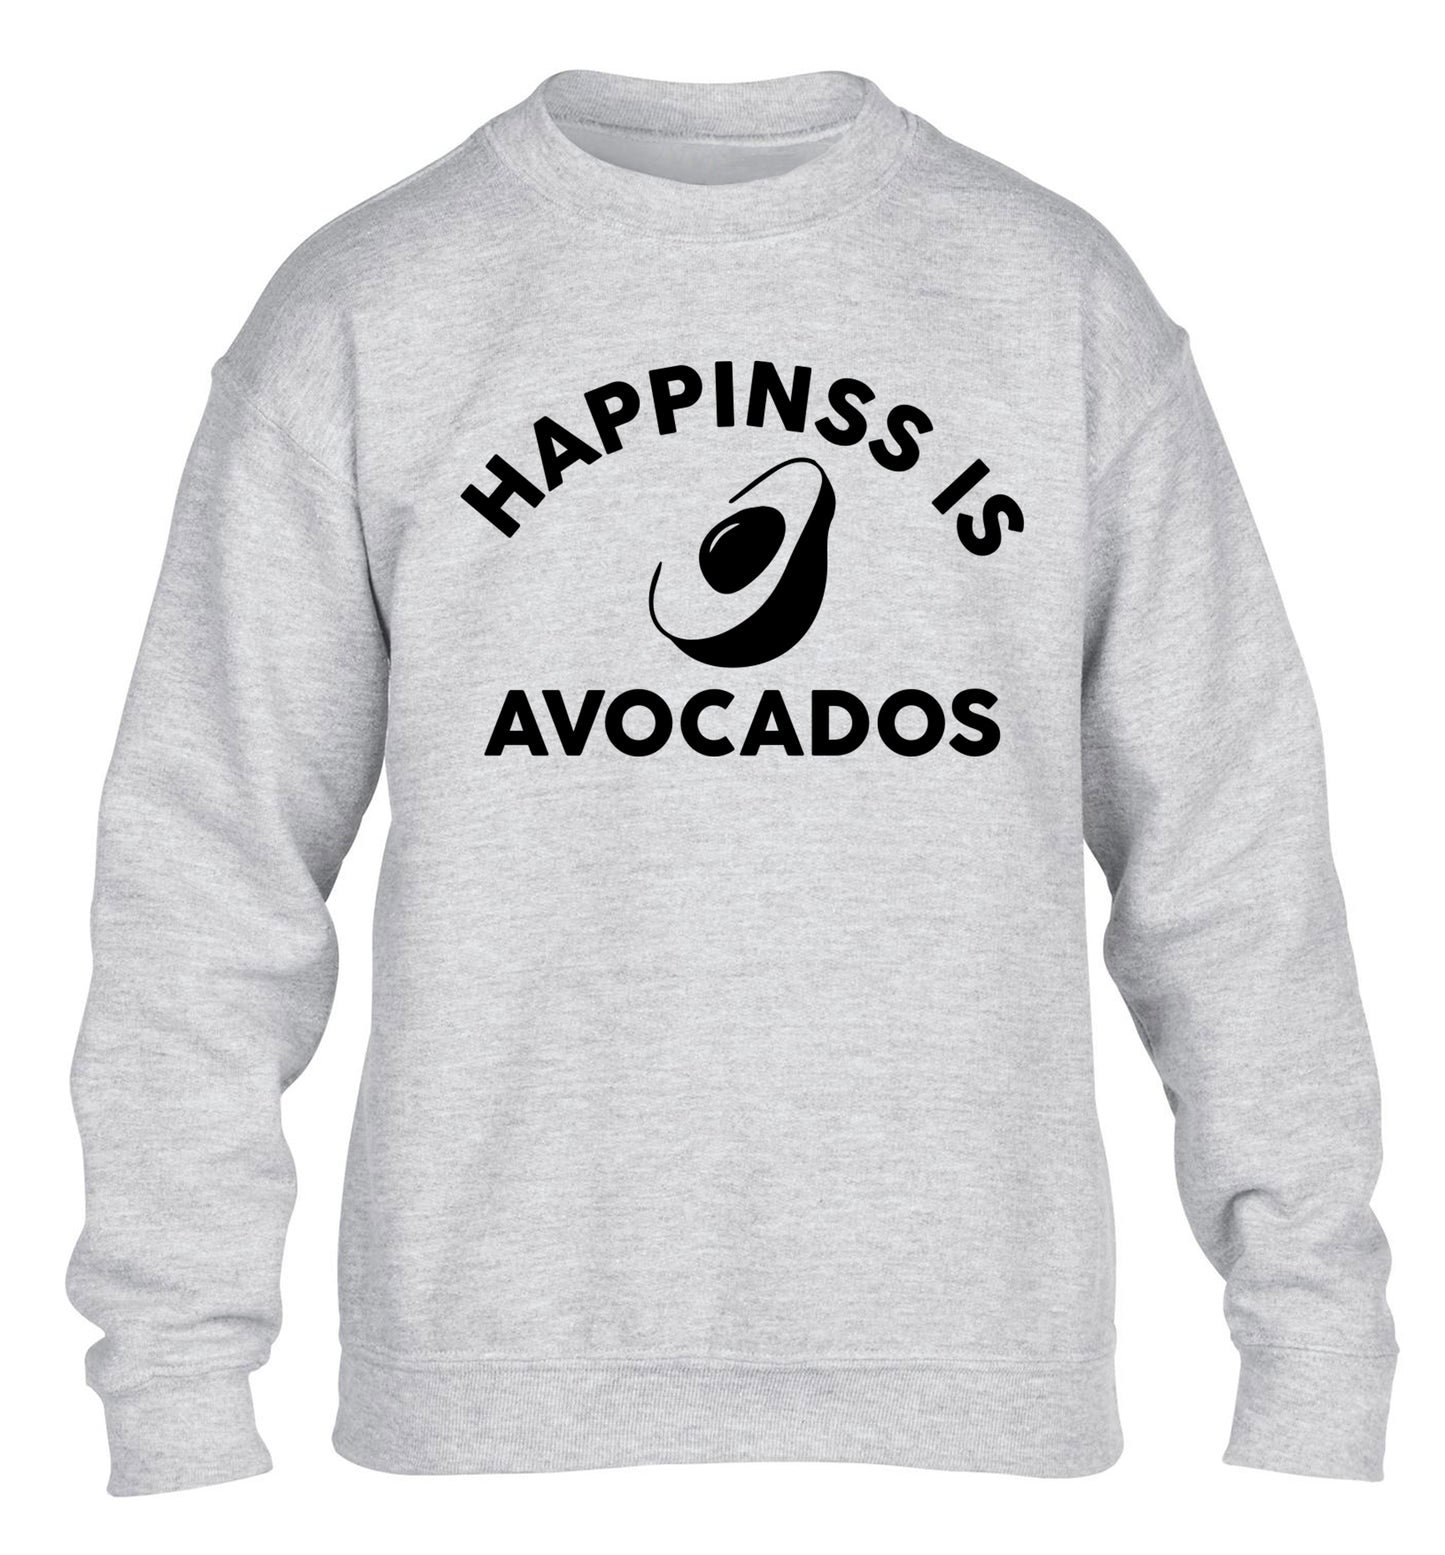 Happiness is avocados children's grey sweater 12-14 Years